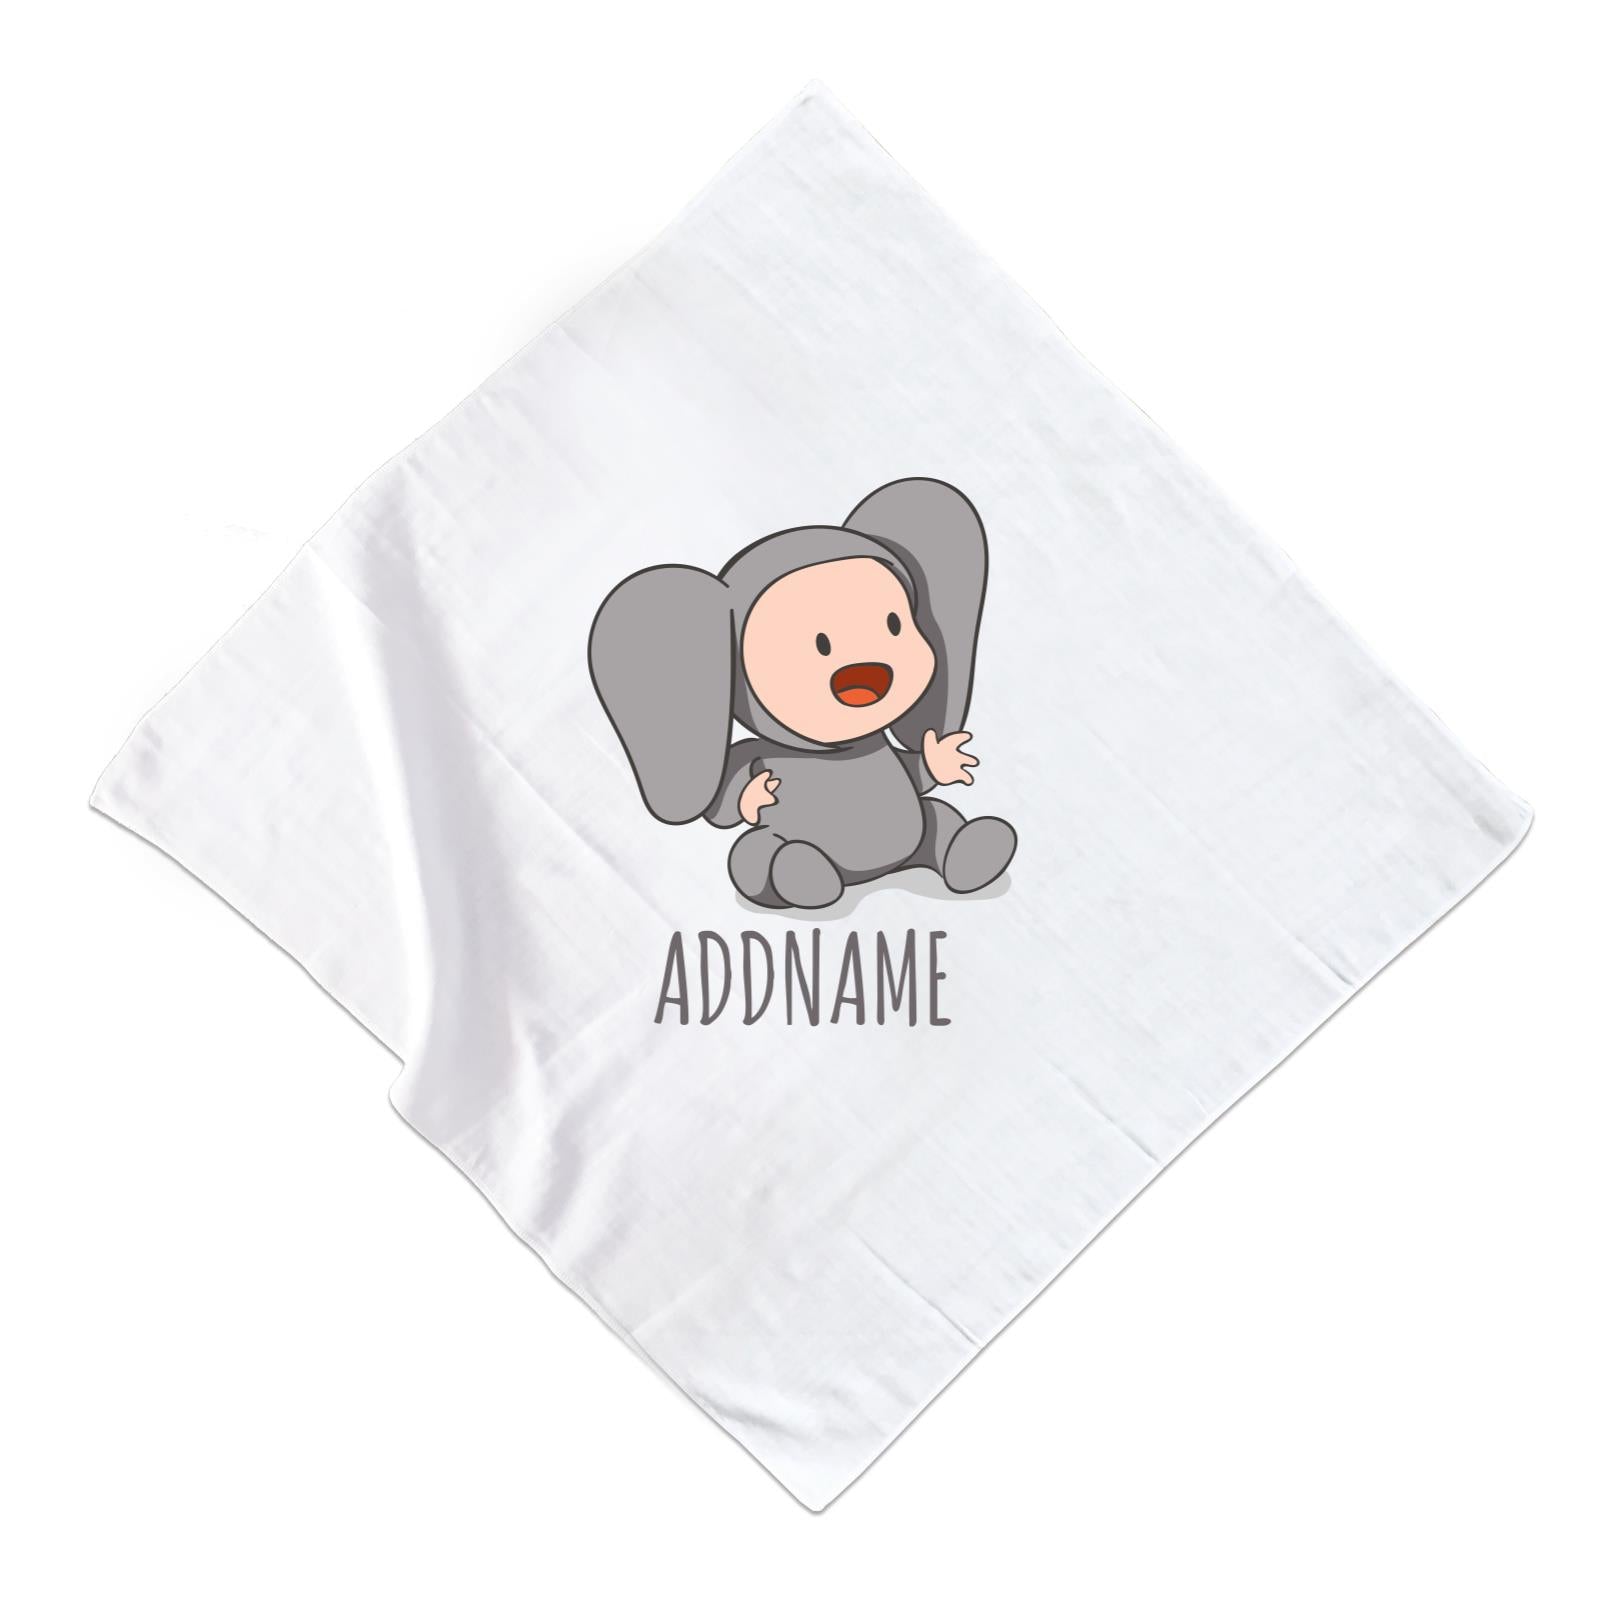 Cute Baby in Grey Elephant Suit Addname Muslin Square